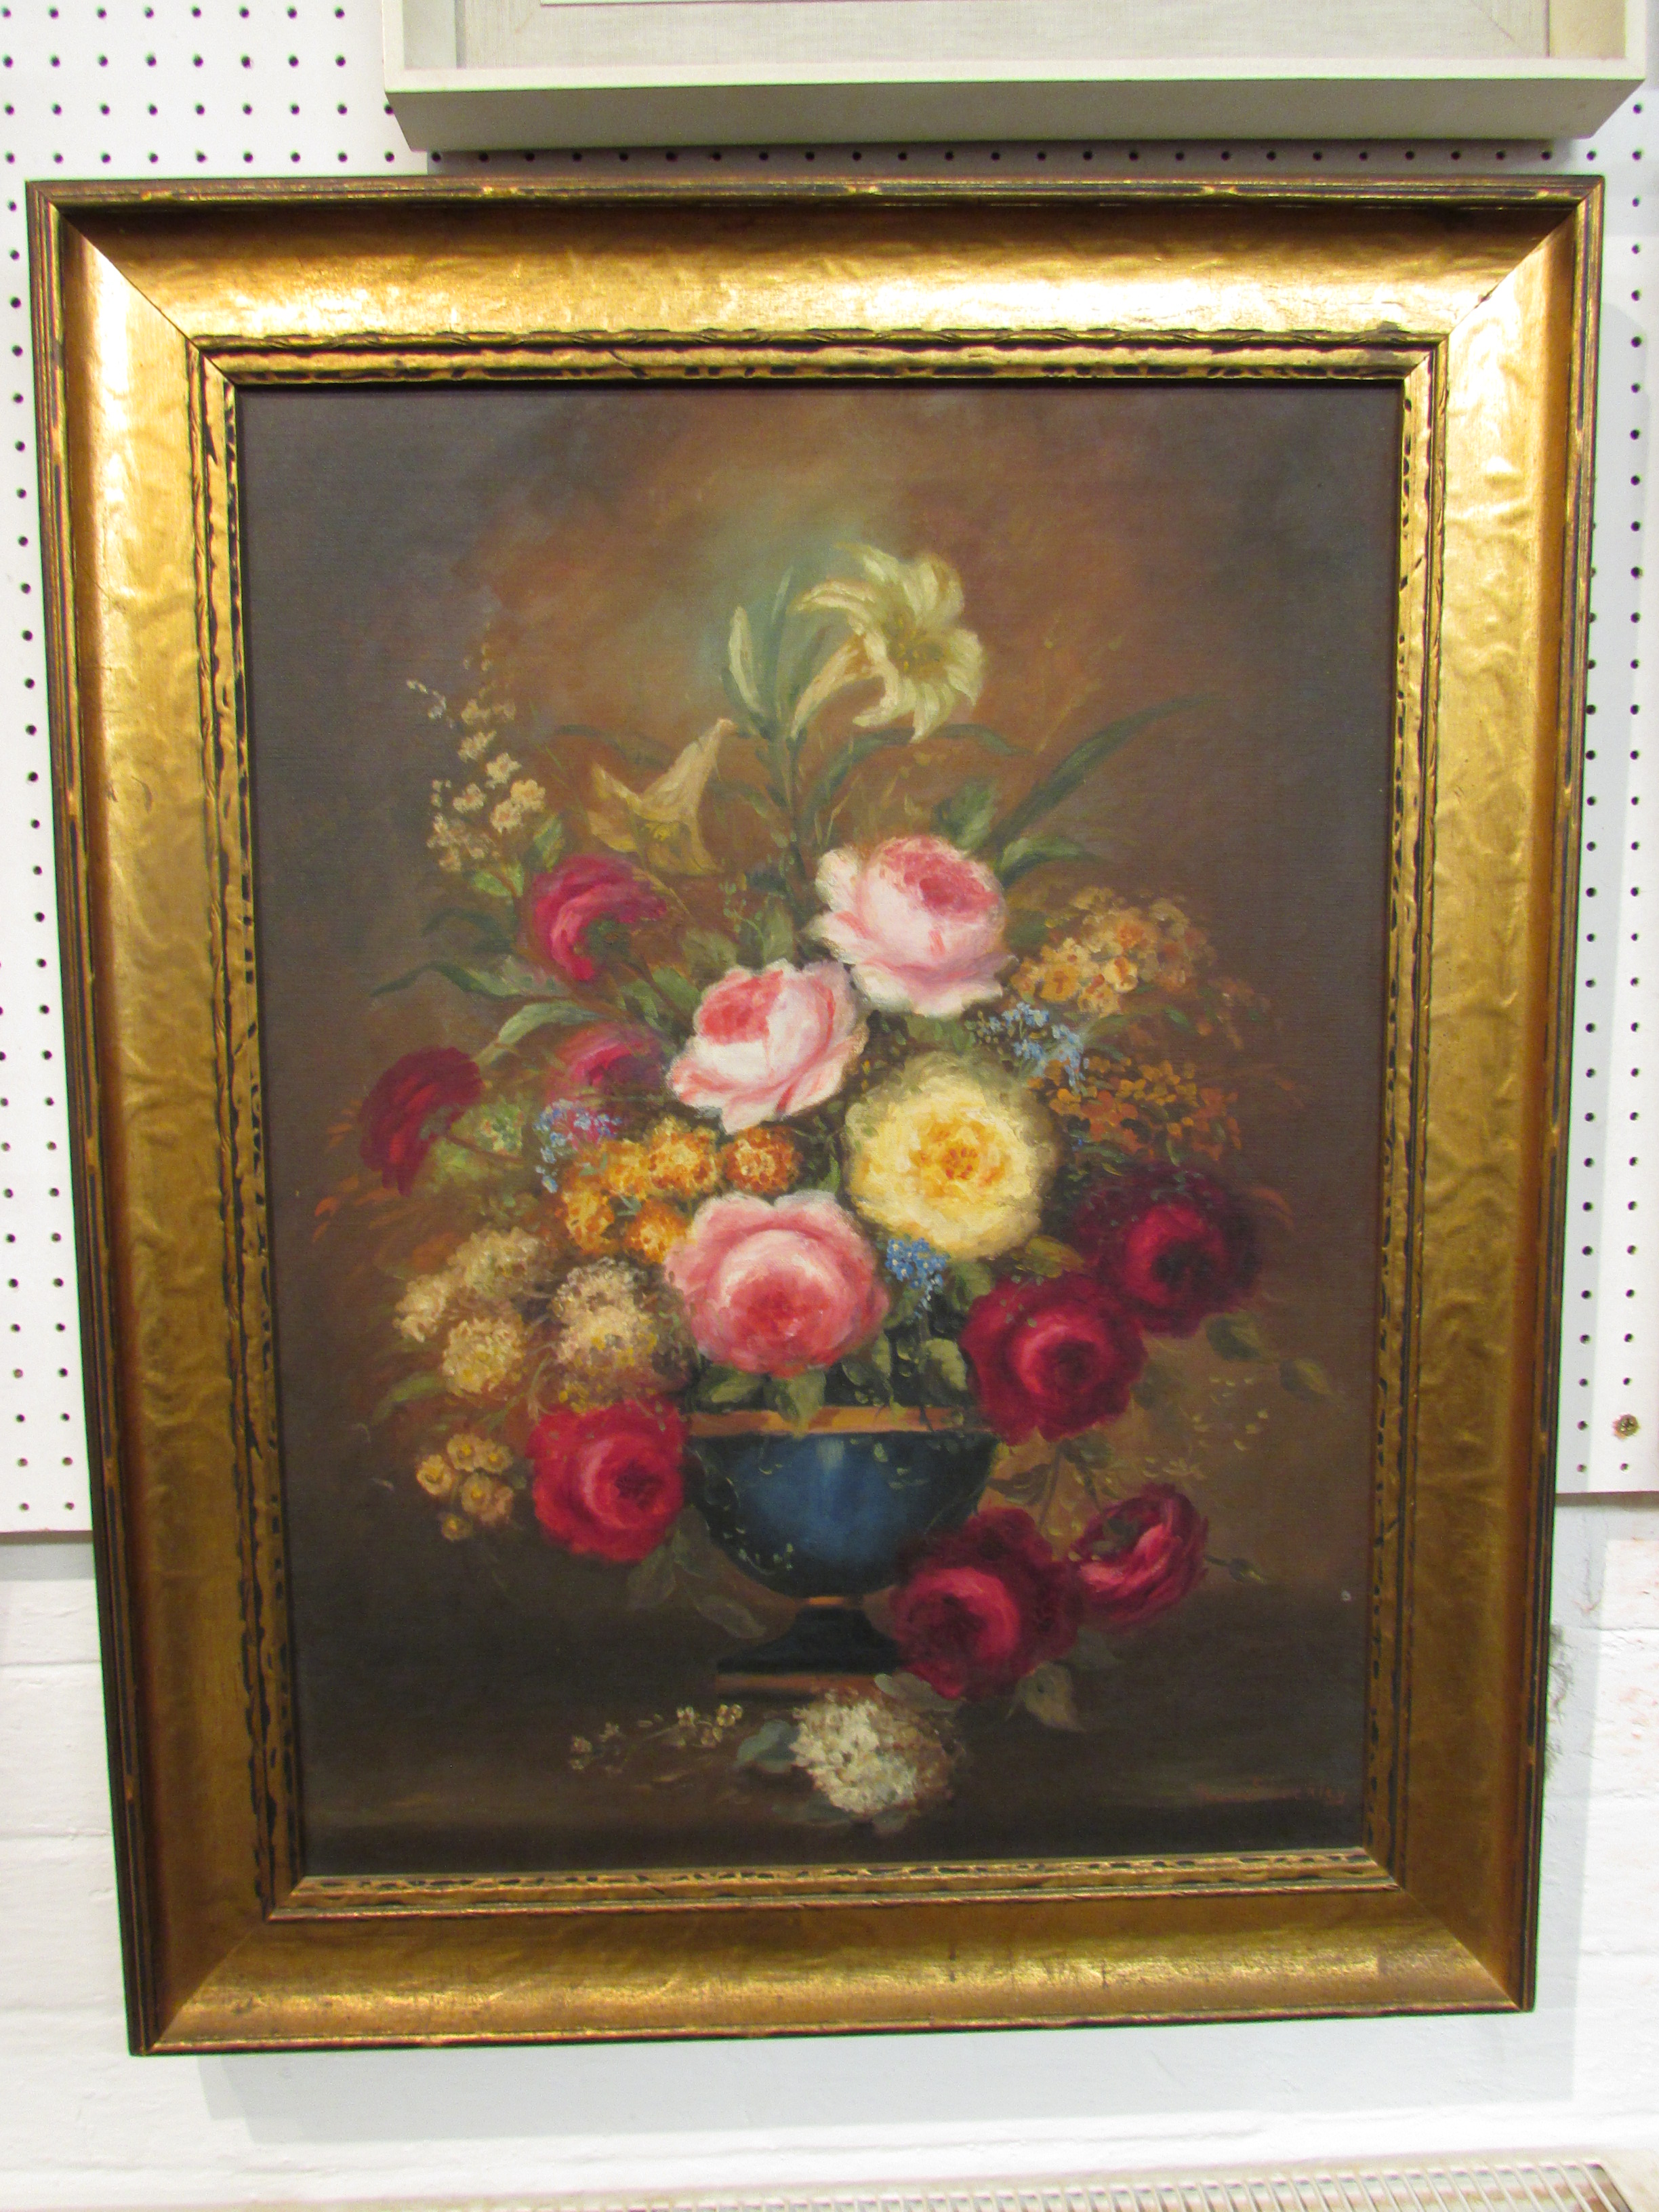 Still life roses and flowers in blue vase, oil on canvas, signed Pearl Shockley lower right, (60cm x